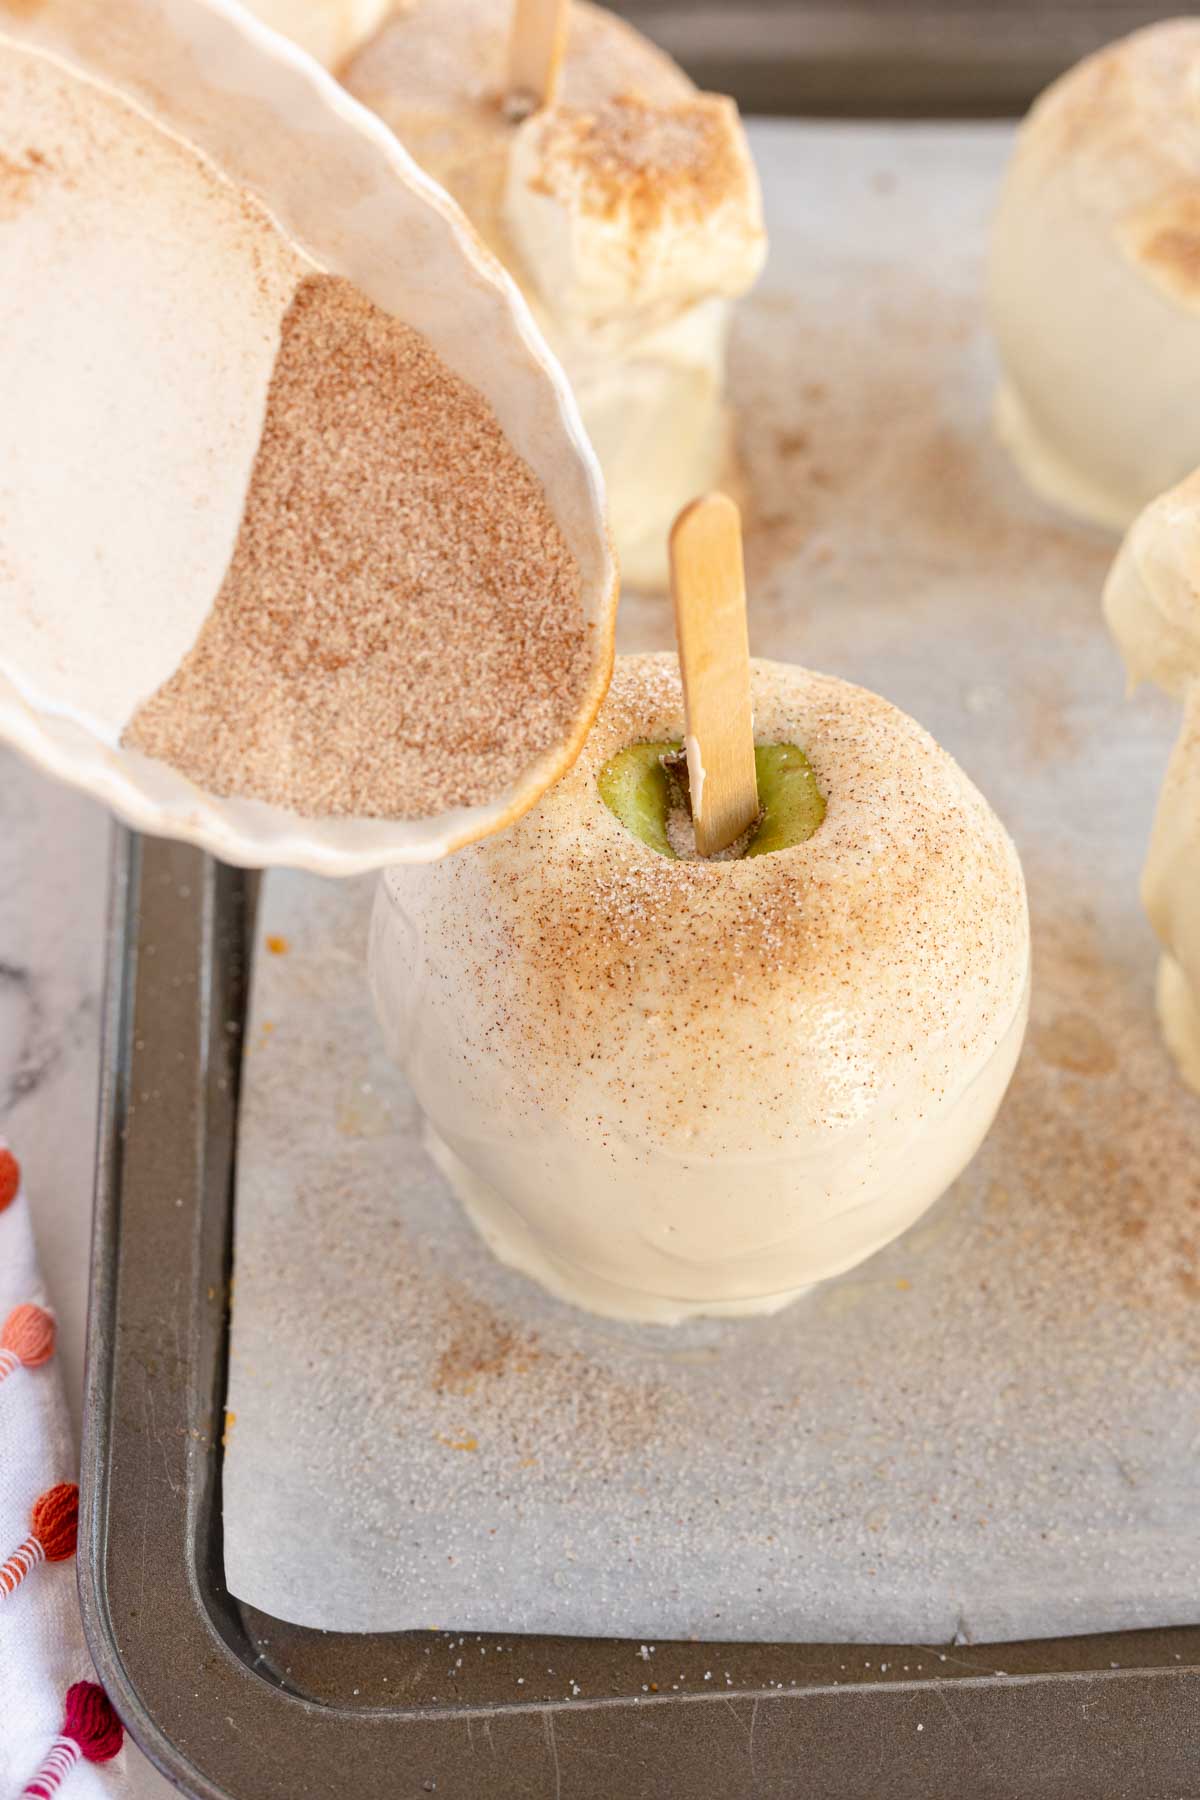 pouring cinnamon sugar onto a white chocolate covered apple